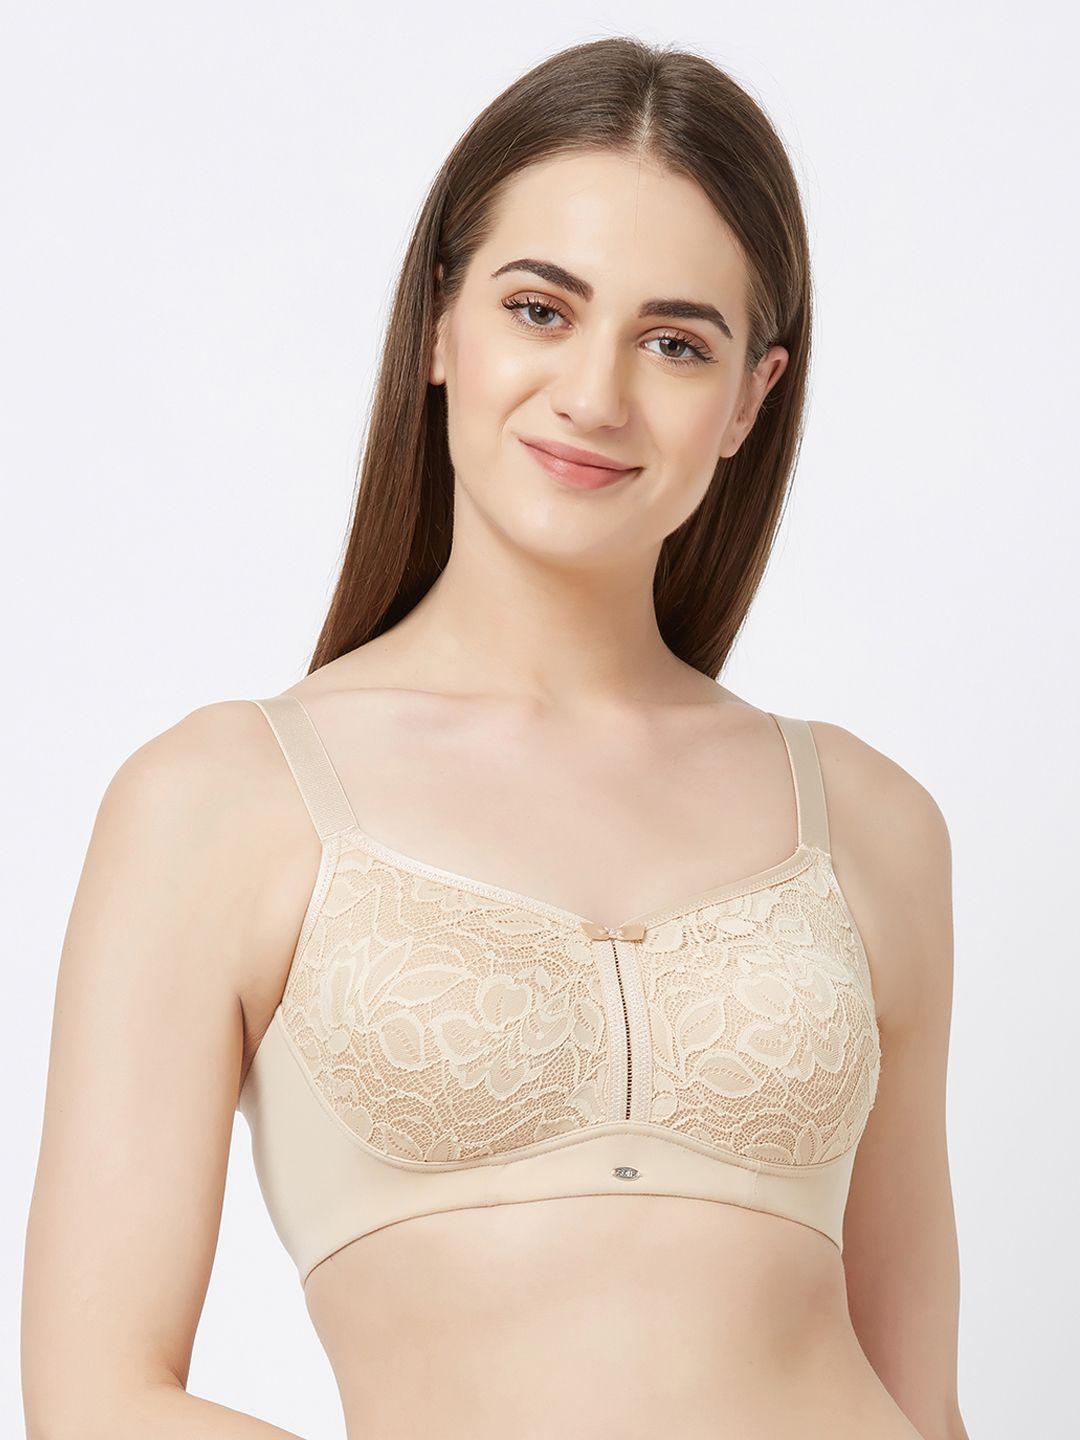 soie-nude-lace-non-wired-non-padded-full-coverage-everyday-bra-fb-705nude